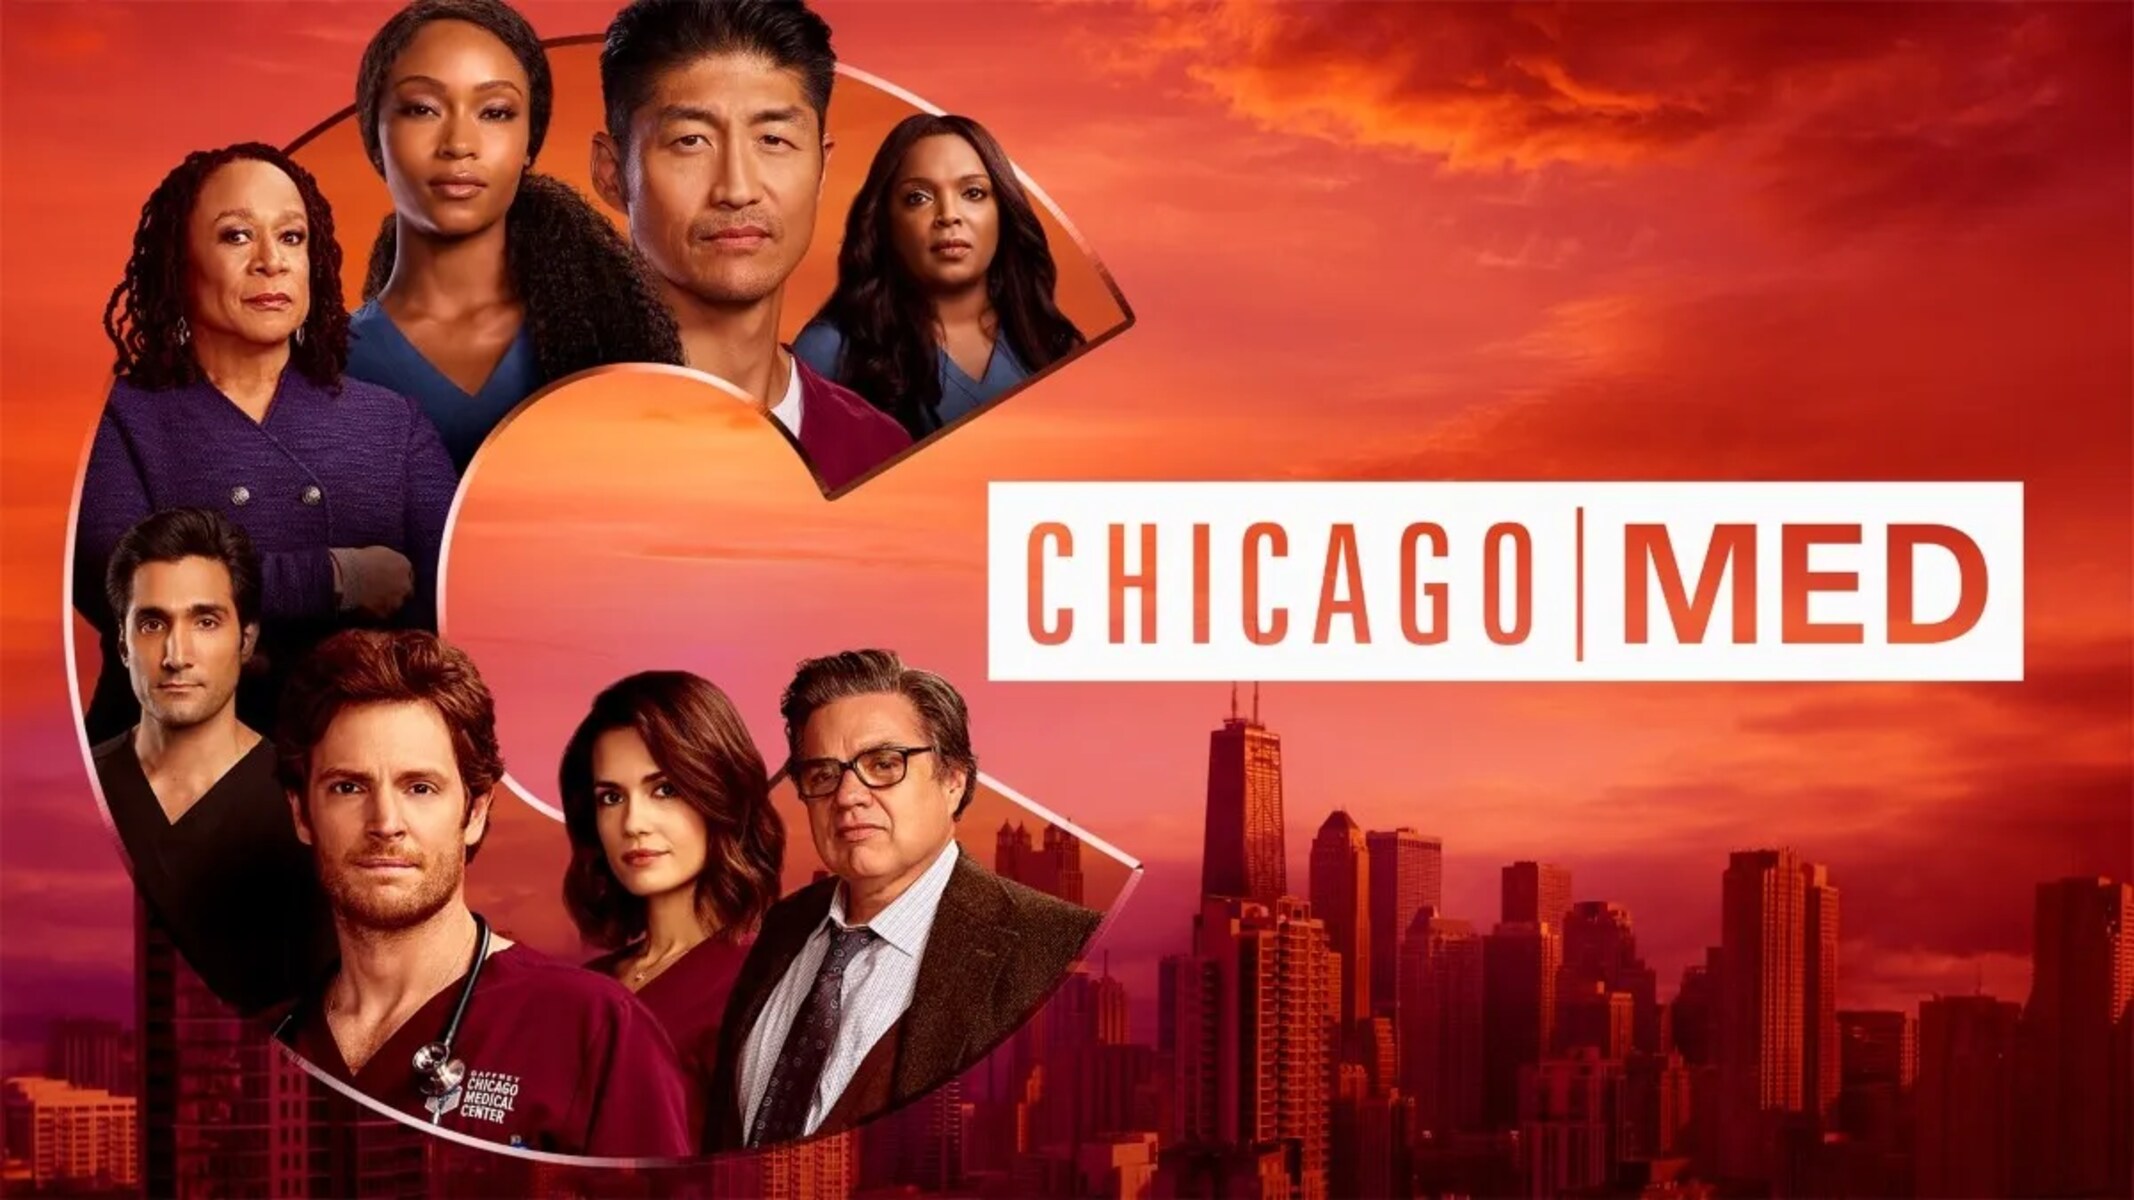 How To Watch Chicago Series